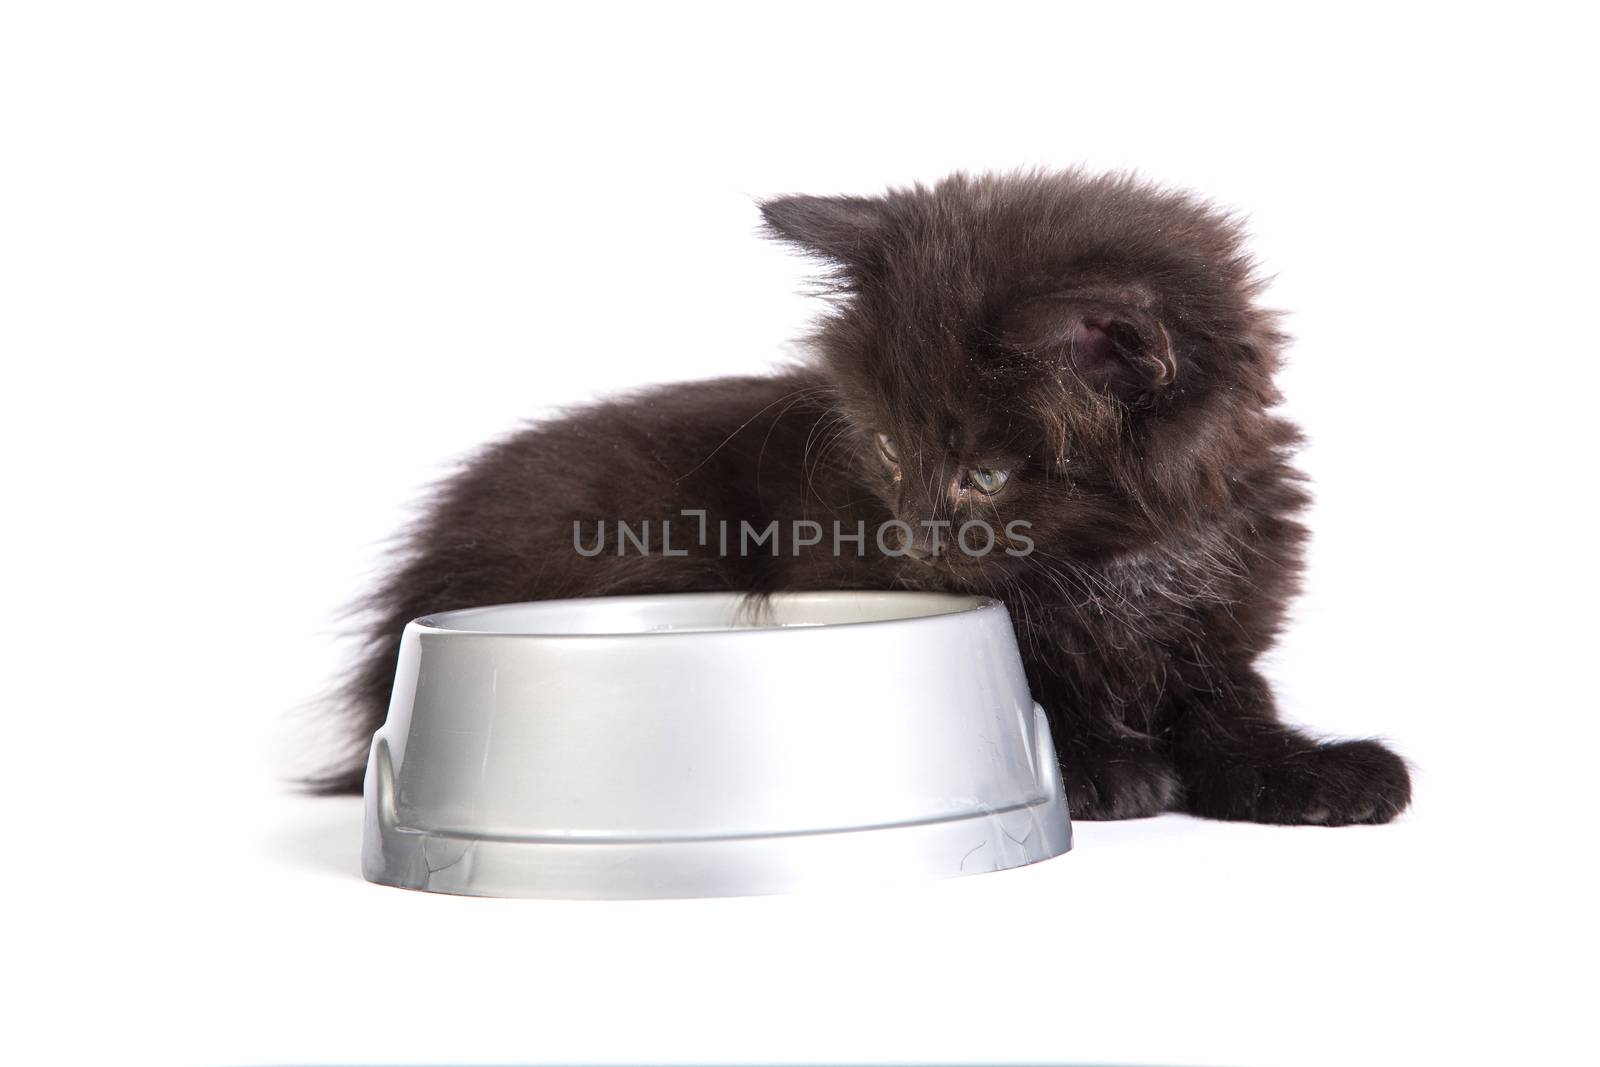 Black kitten eating cat food on a white background by bloodua